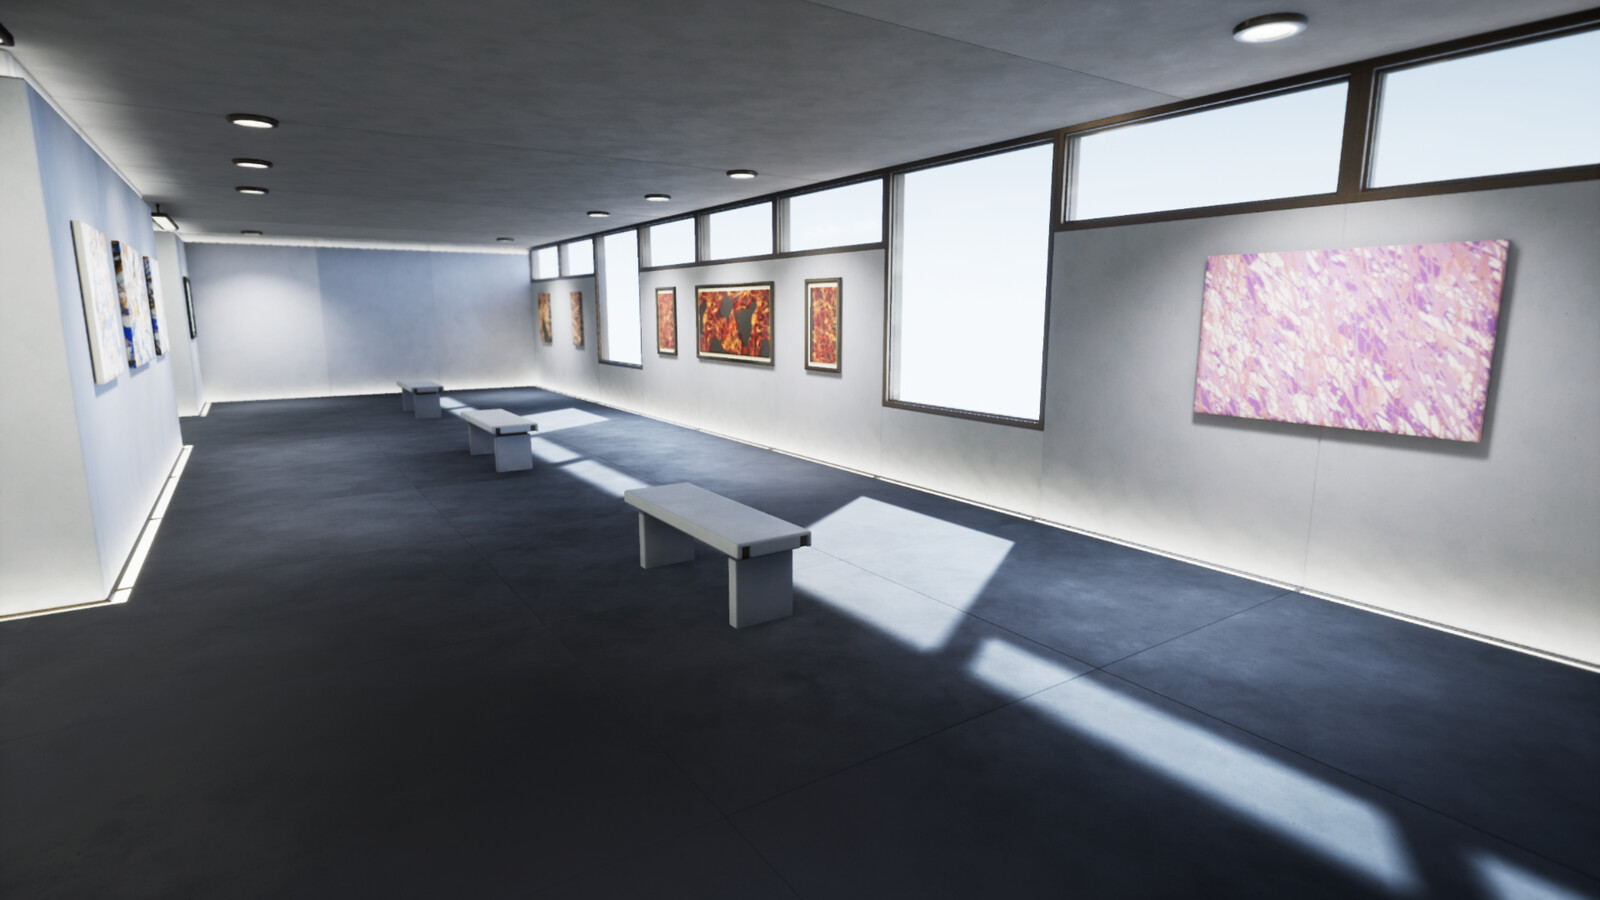 The gallery space in Unreal